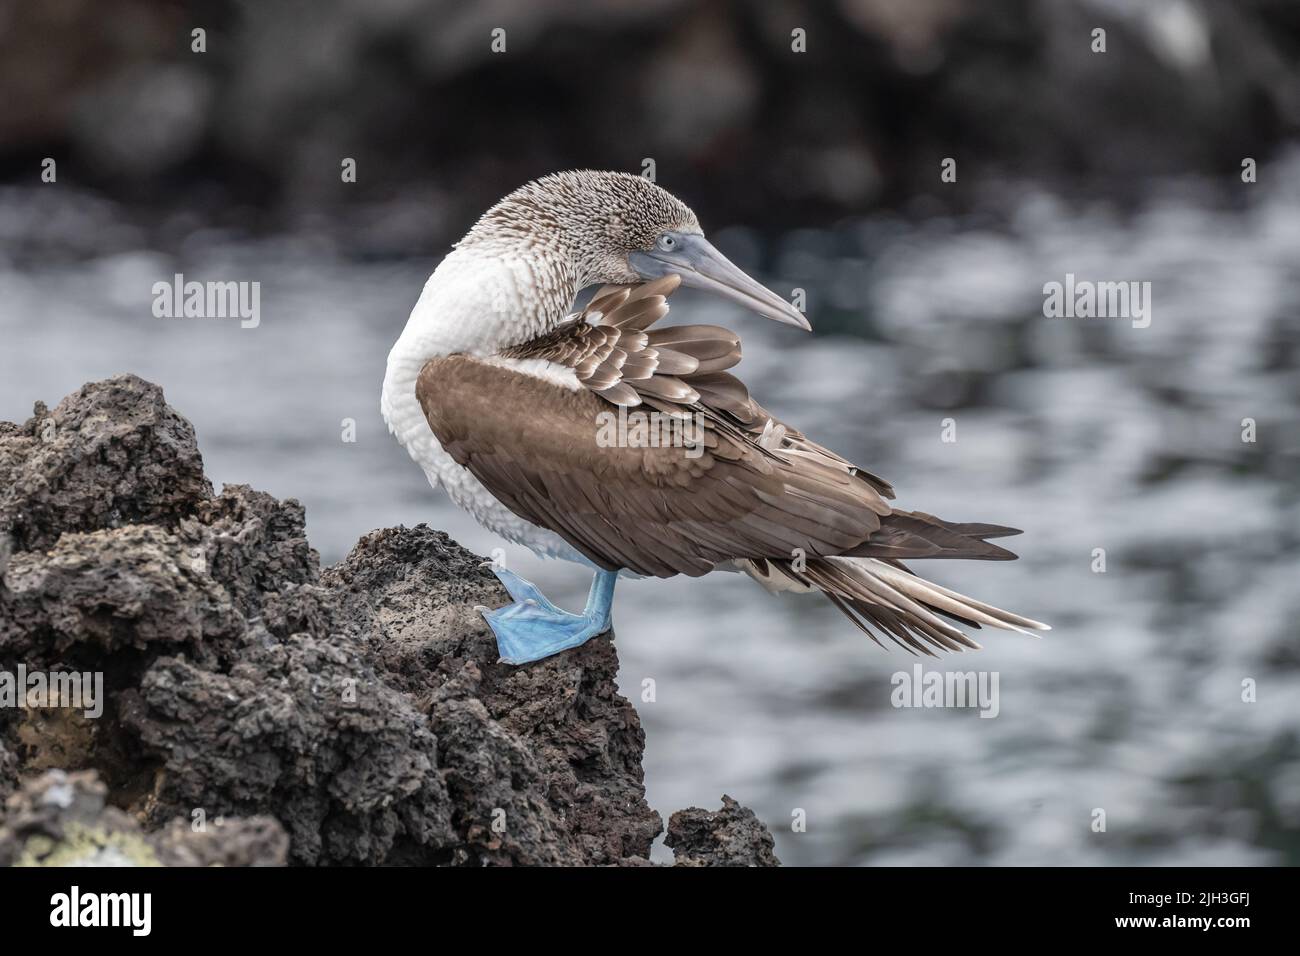 Blue-footed booby with distinctive bright blue feet in the Galapagos Stock Photo